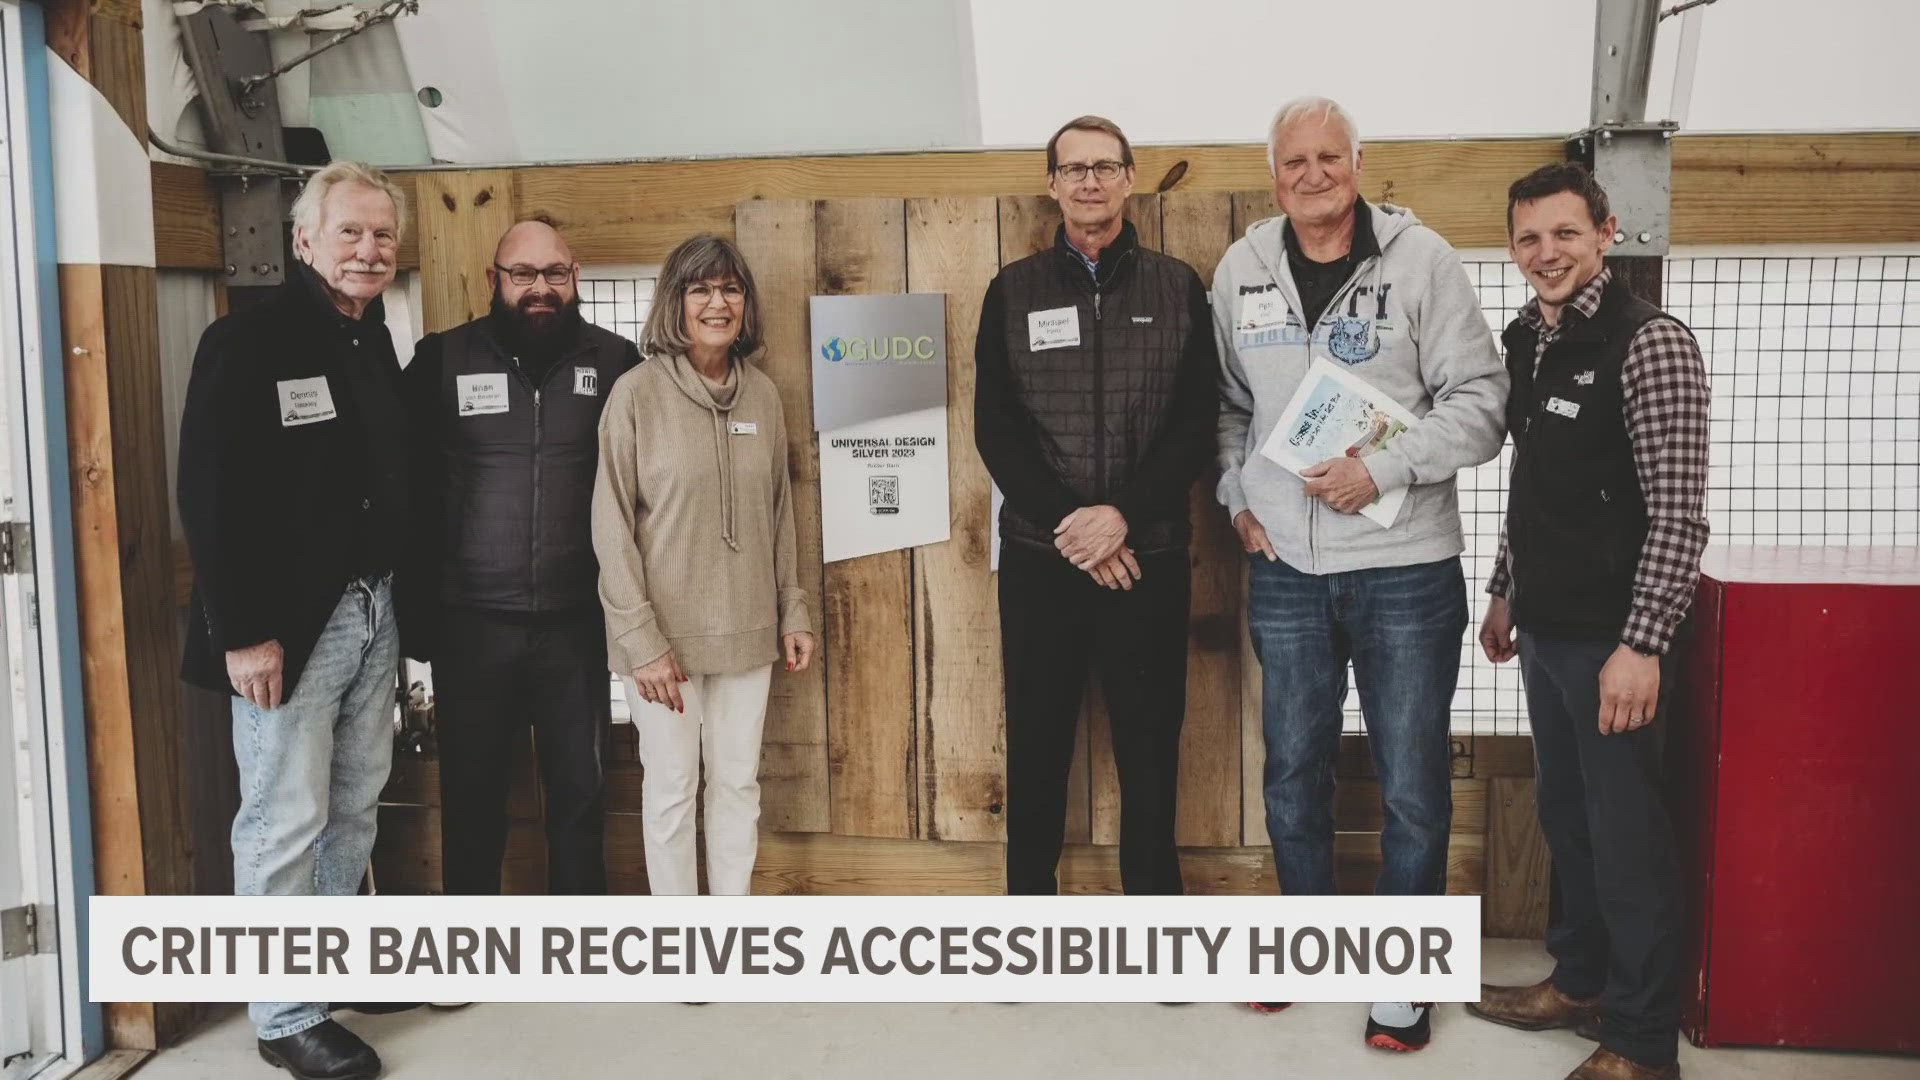 Leaders from the popular attraction believe they're the first farm in the world to achieve Universal Design Silver Certification. They told us what that means.